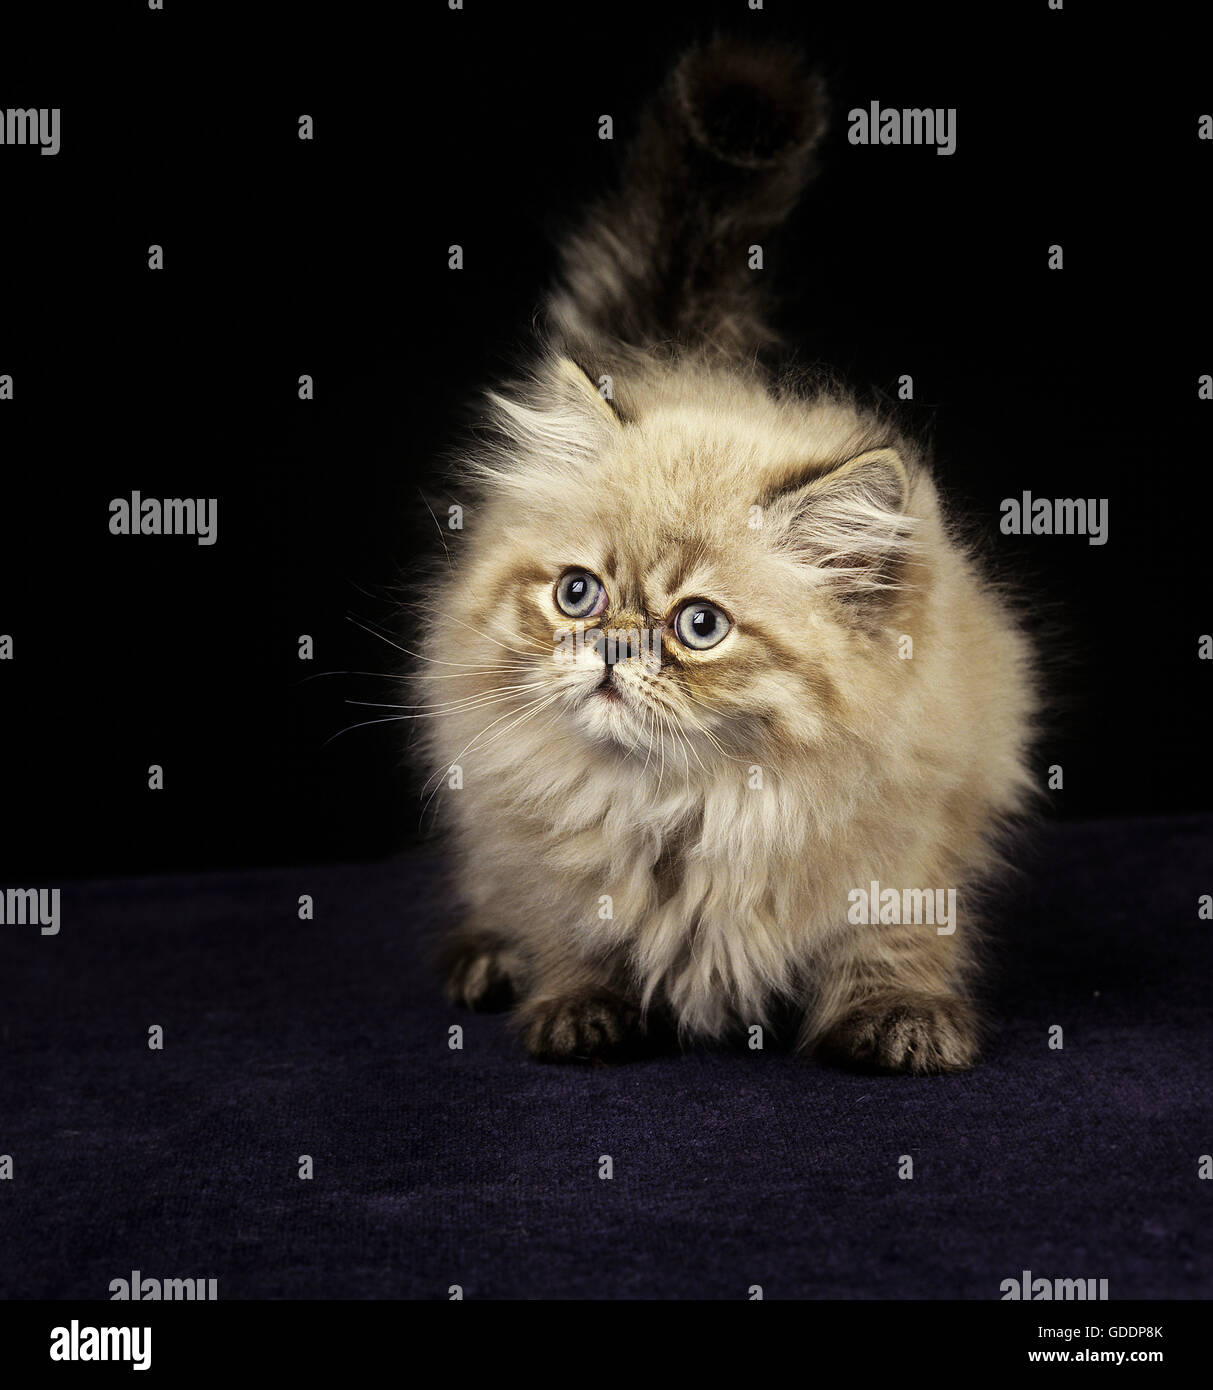 Colourpoint Seal Point Persian Domestic Cat, Kitten standing against Black Background Stock Photo